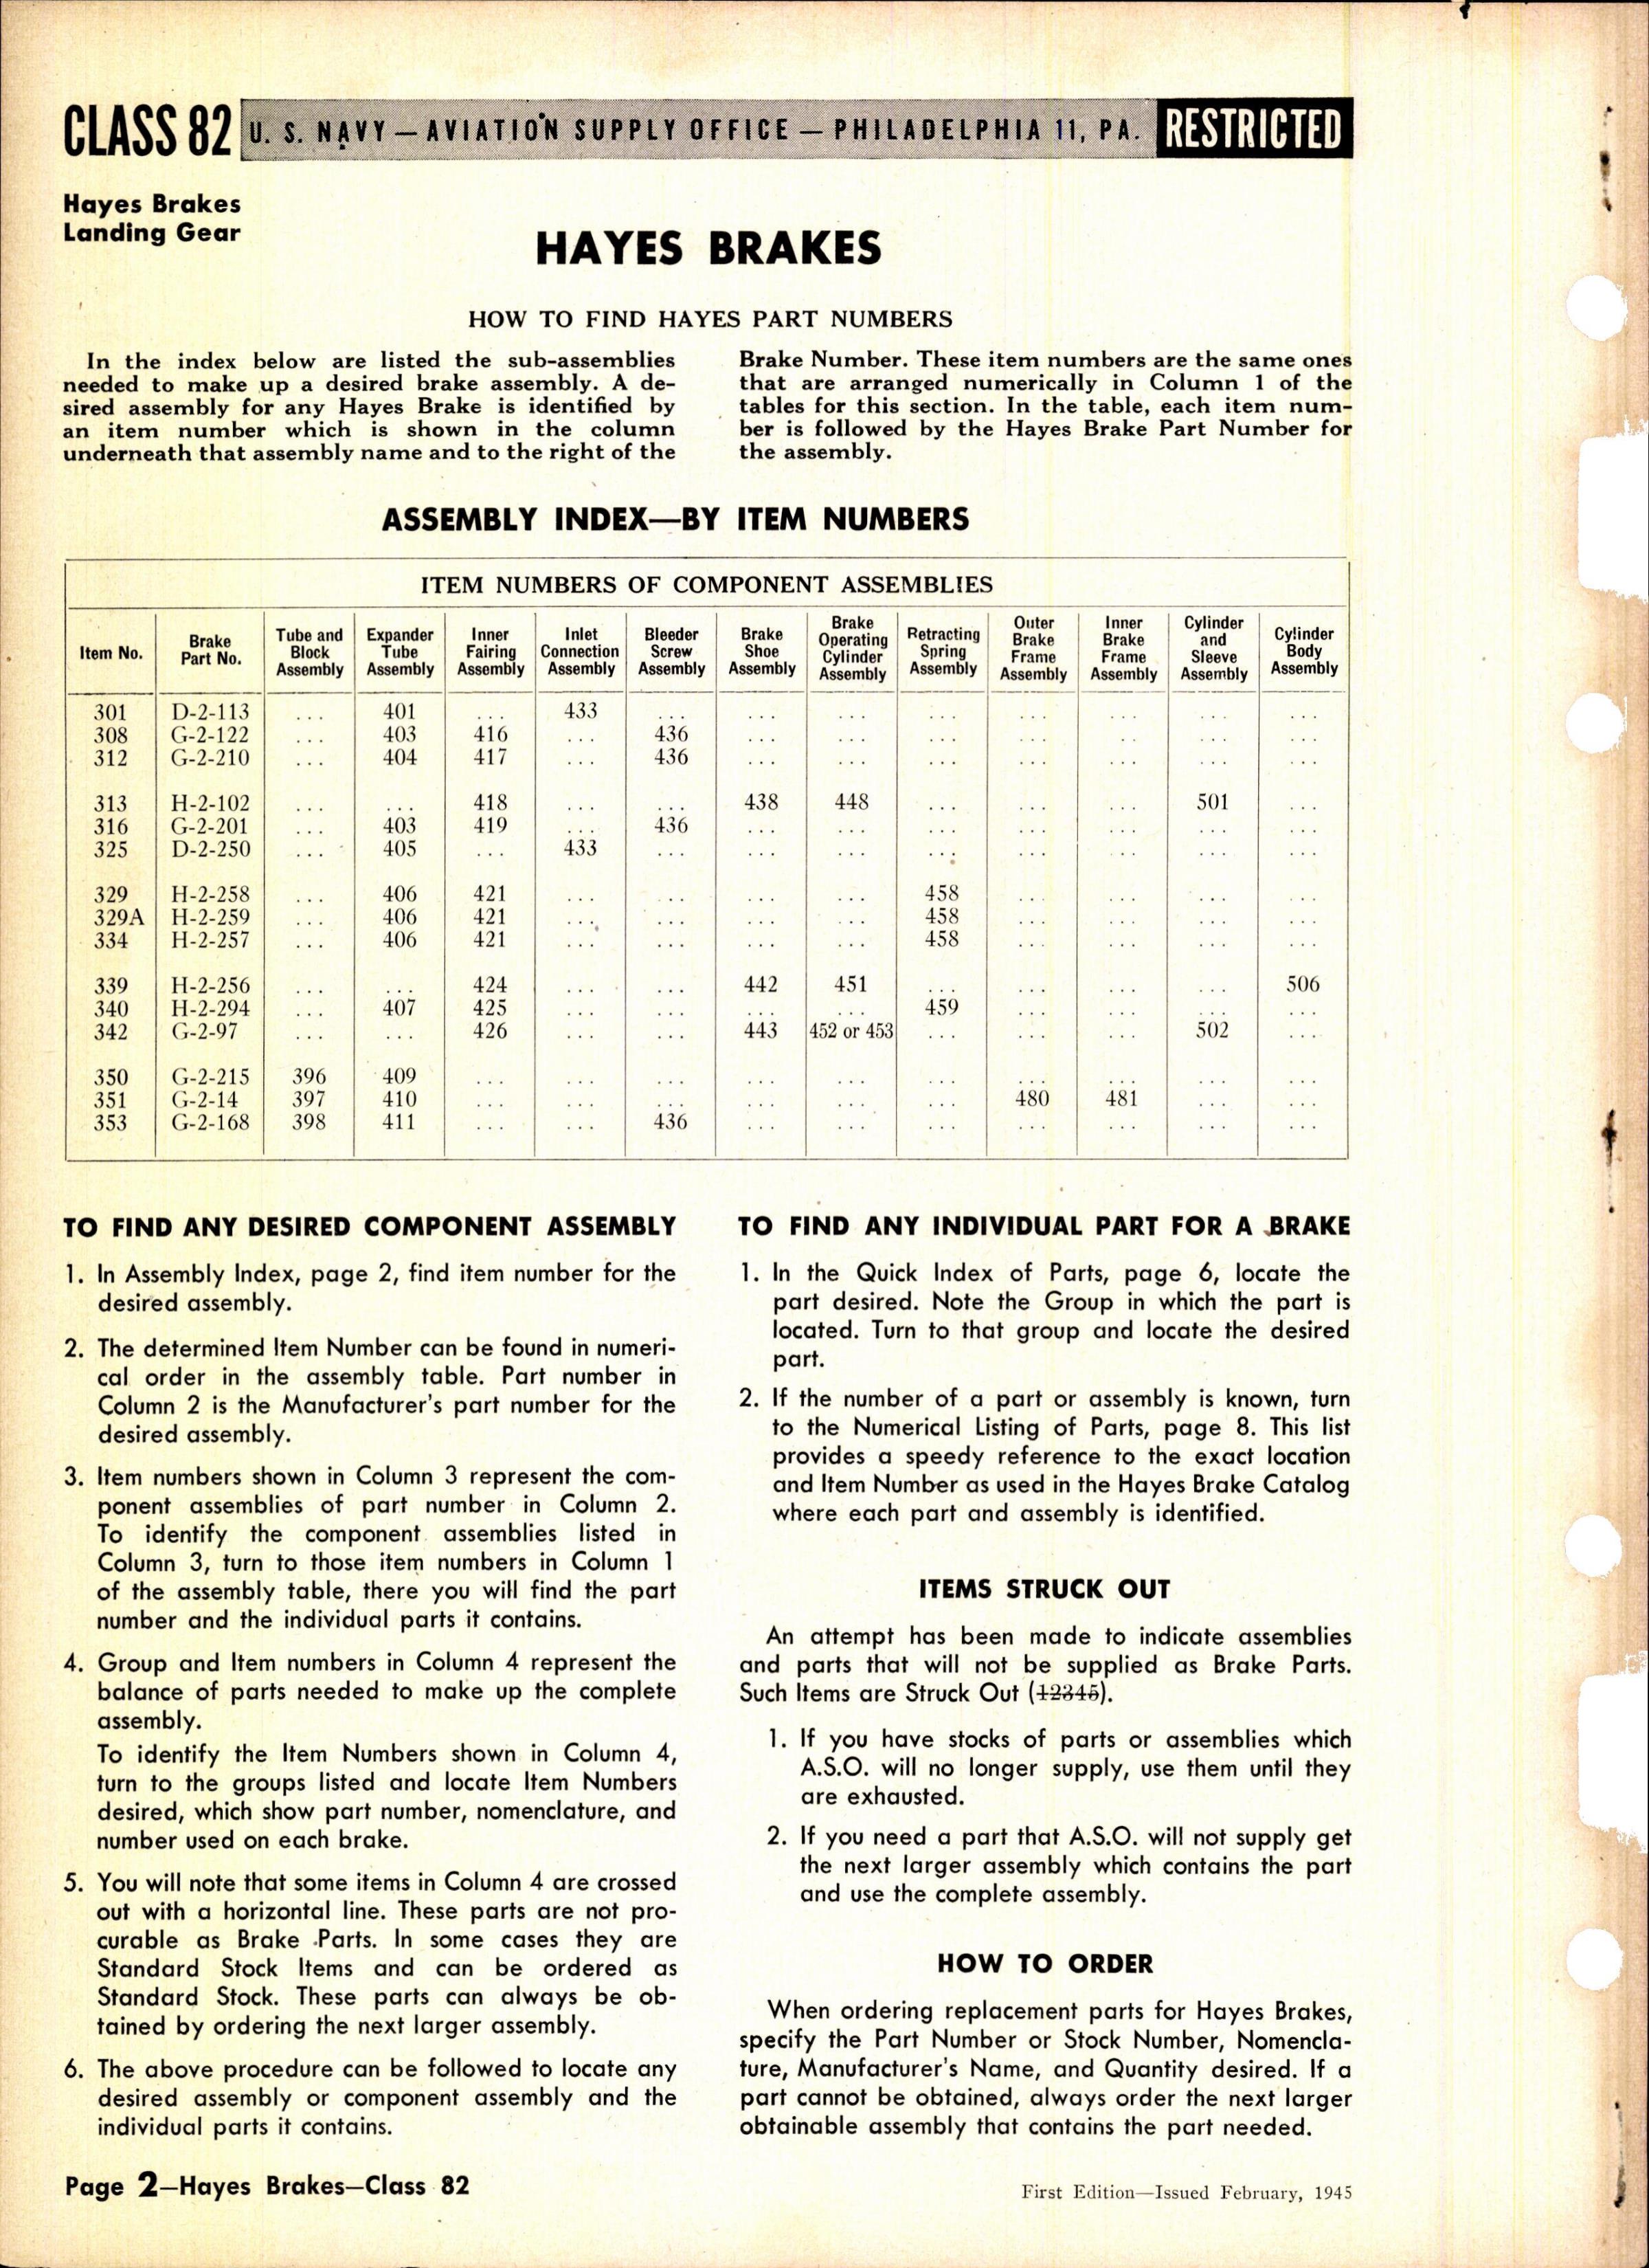 Sample page 2 from AirCorps Library document: Hayes Brakes